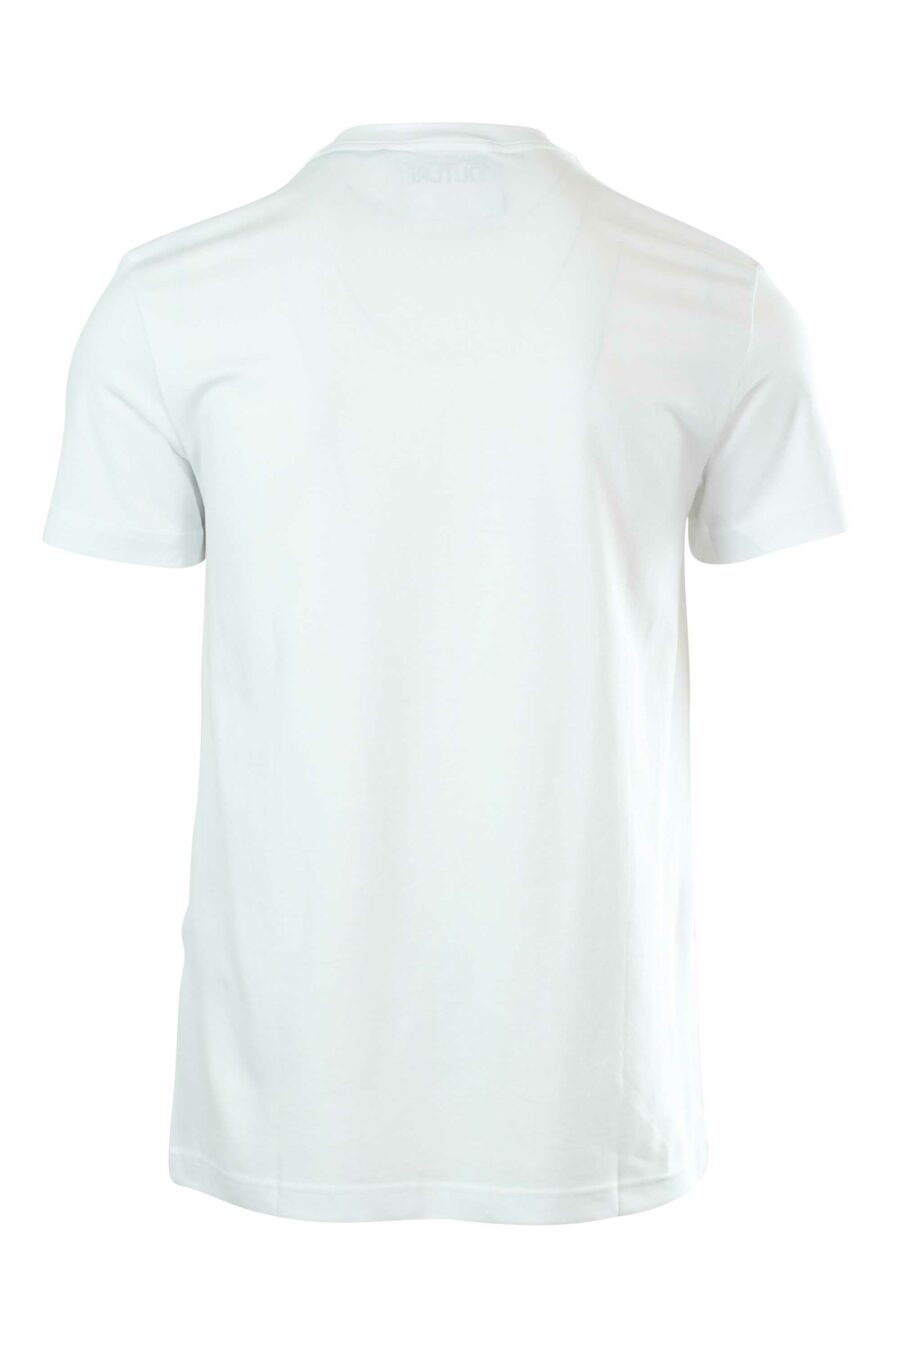 White T-shirt with logo on collar - 8052019237092 2